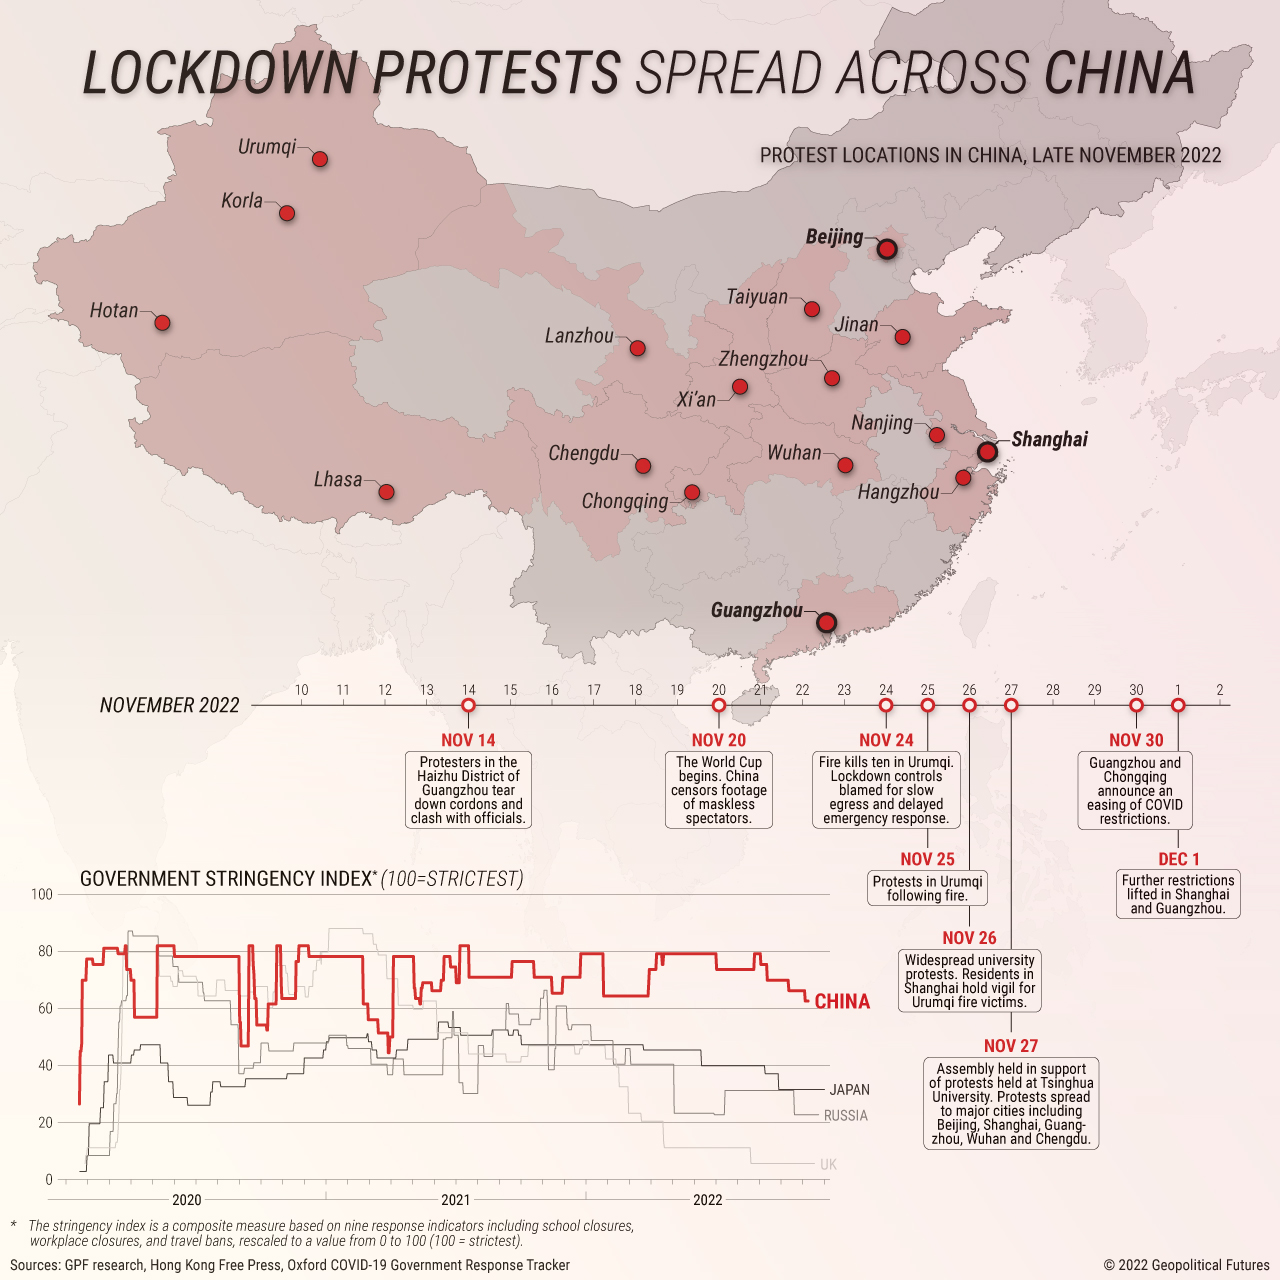 Lockdown Protests Spread Across China